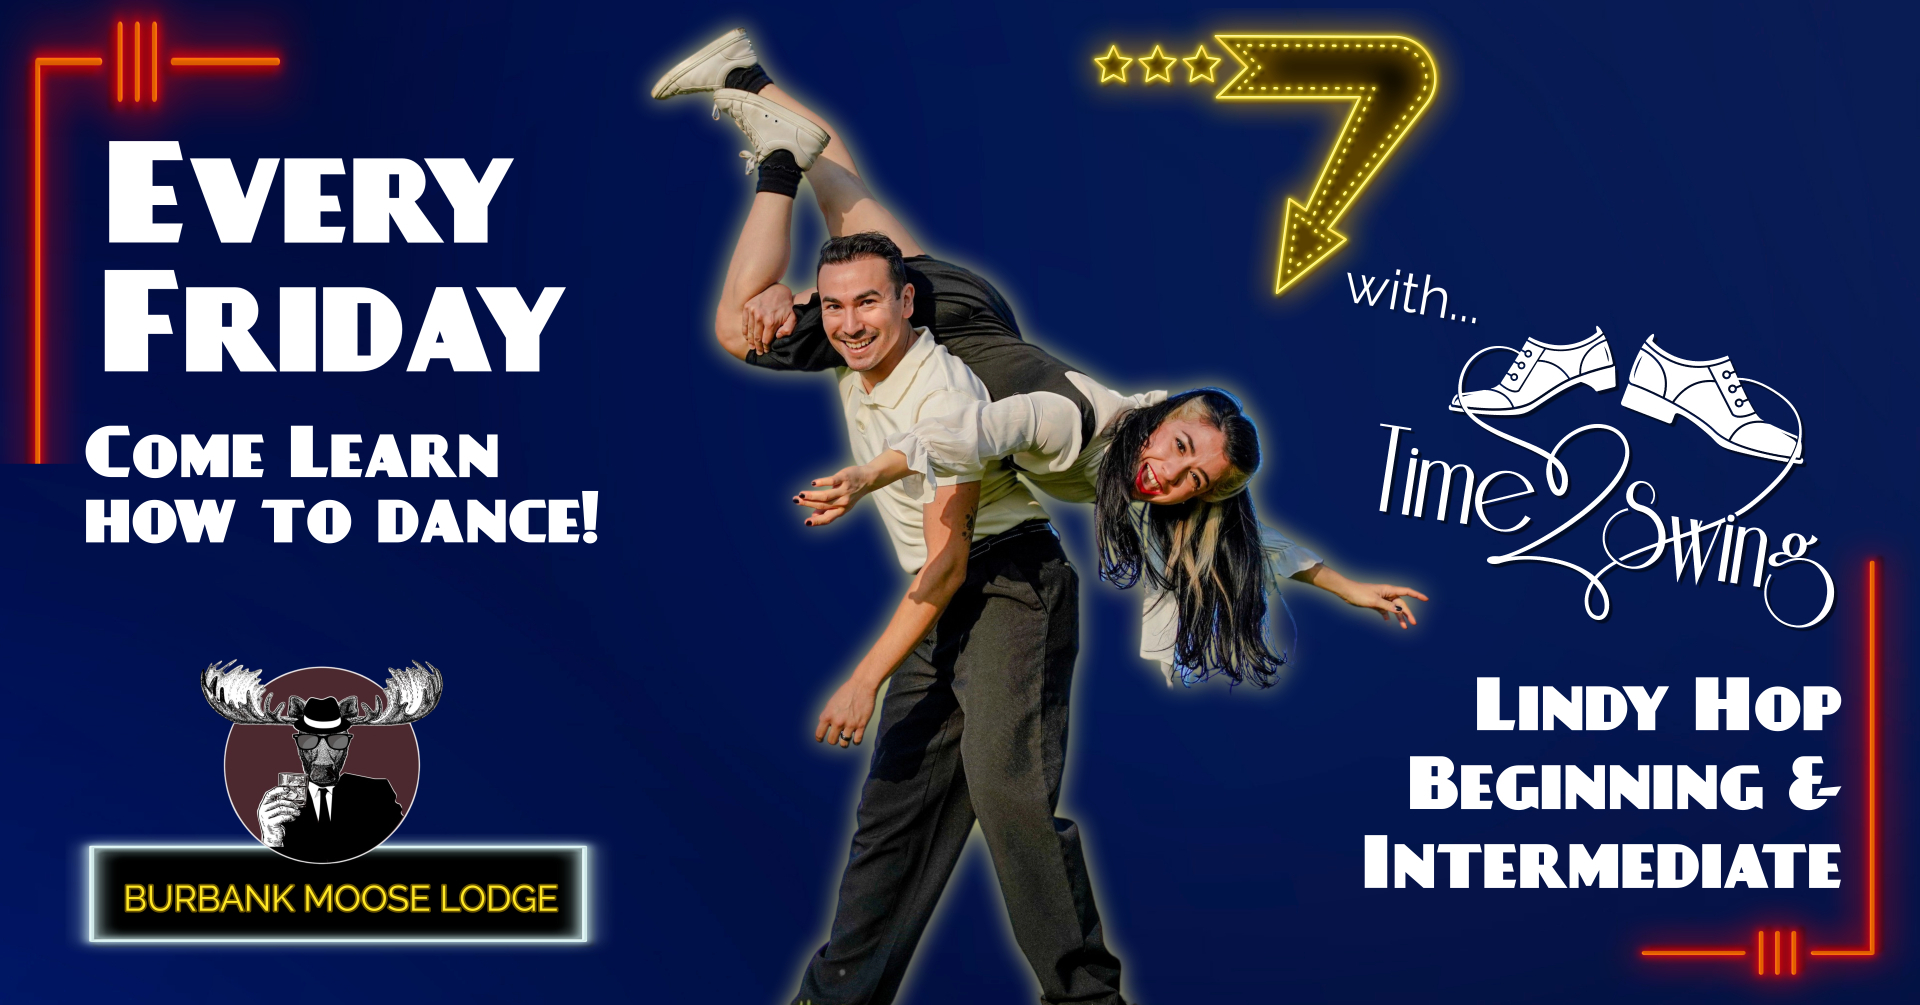 LINDY HOP CLASSES with TIME2SWING at The Moose!